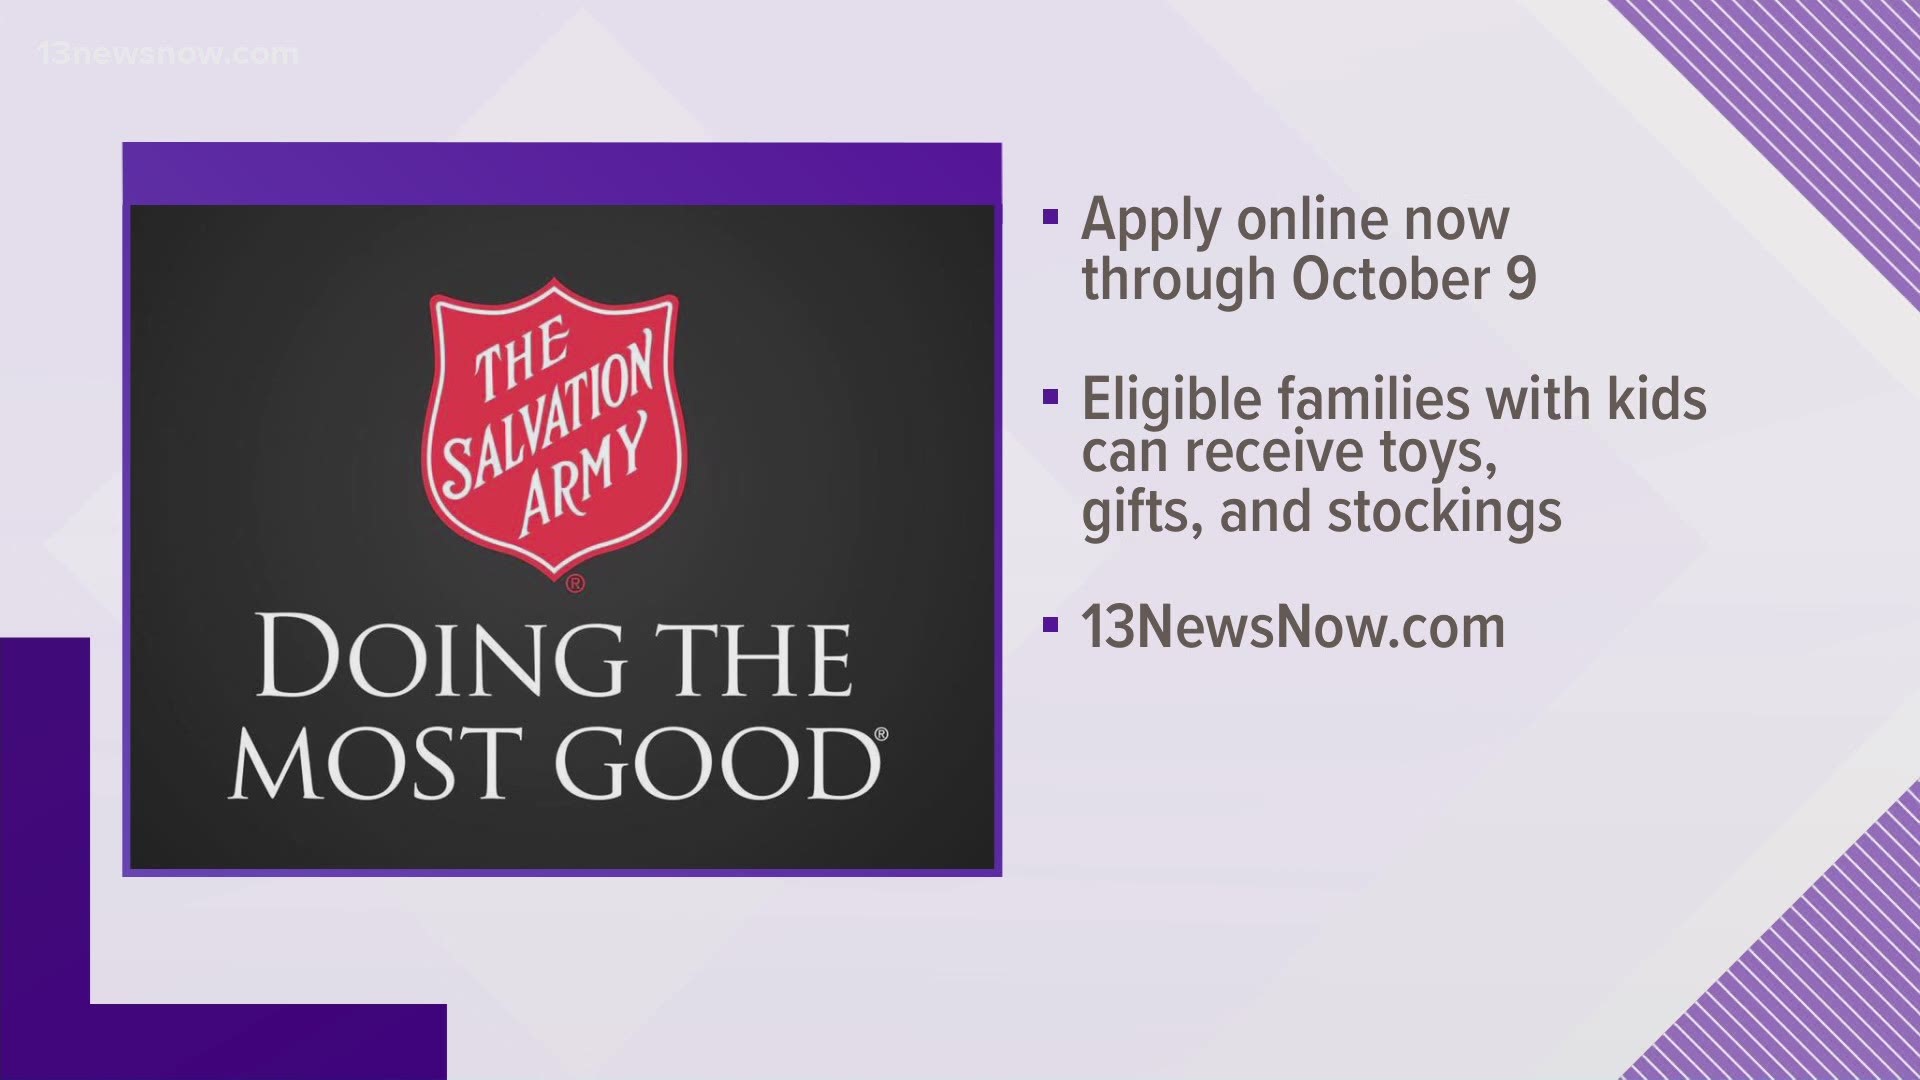 It's close to that time of year and, once again, the Salvation Army has partnered with 13News Now to put on their annual Angel Tree initiative.